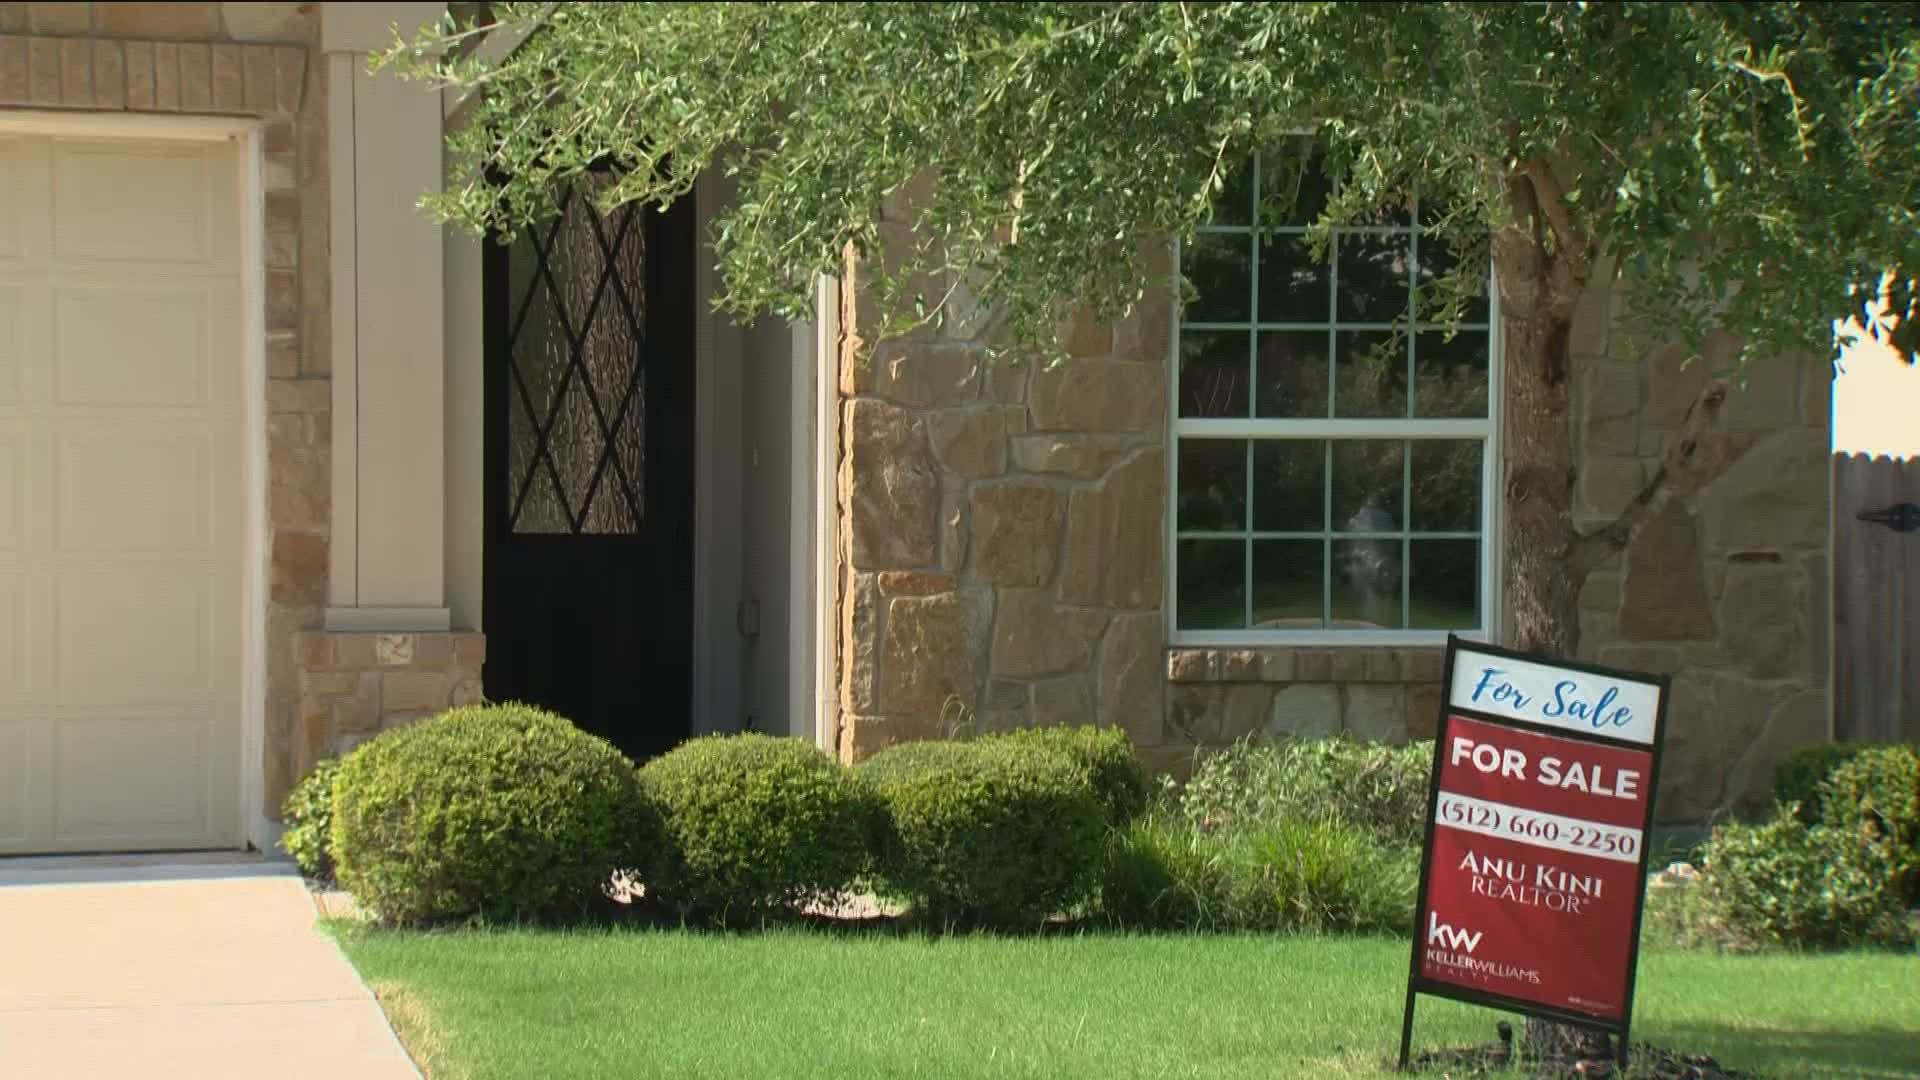 Local Realtors say housing market inventory is up as the market begins to cool off. But prices likely won't go down to 2019 levels.